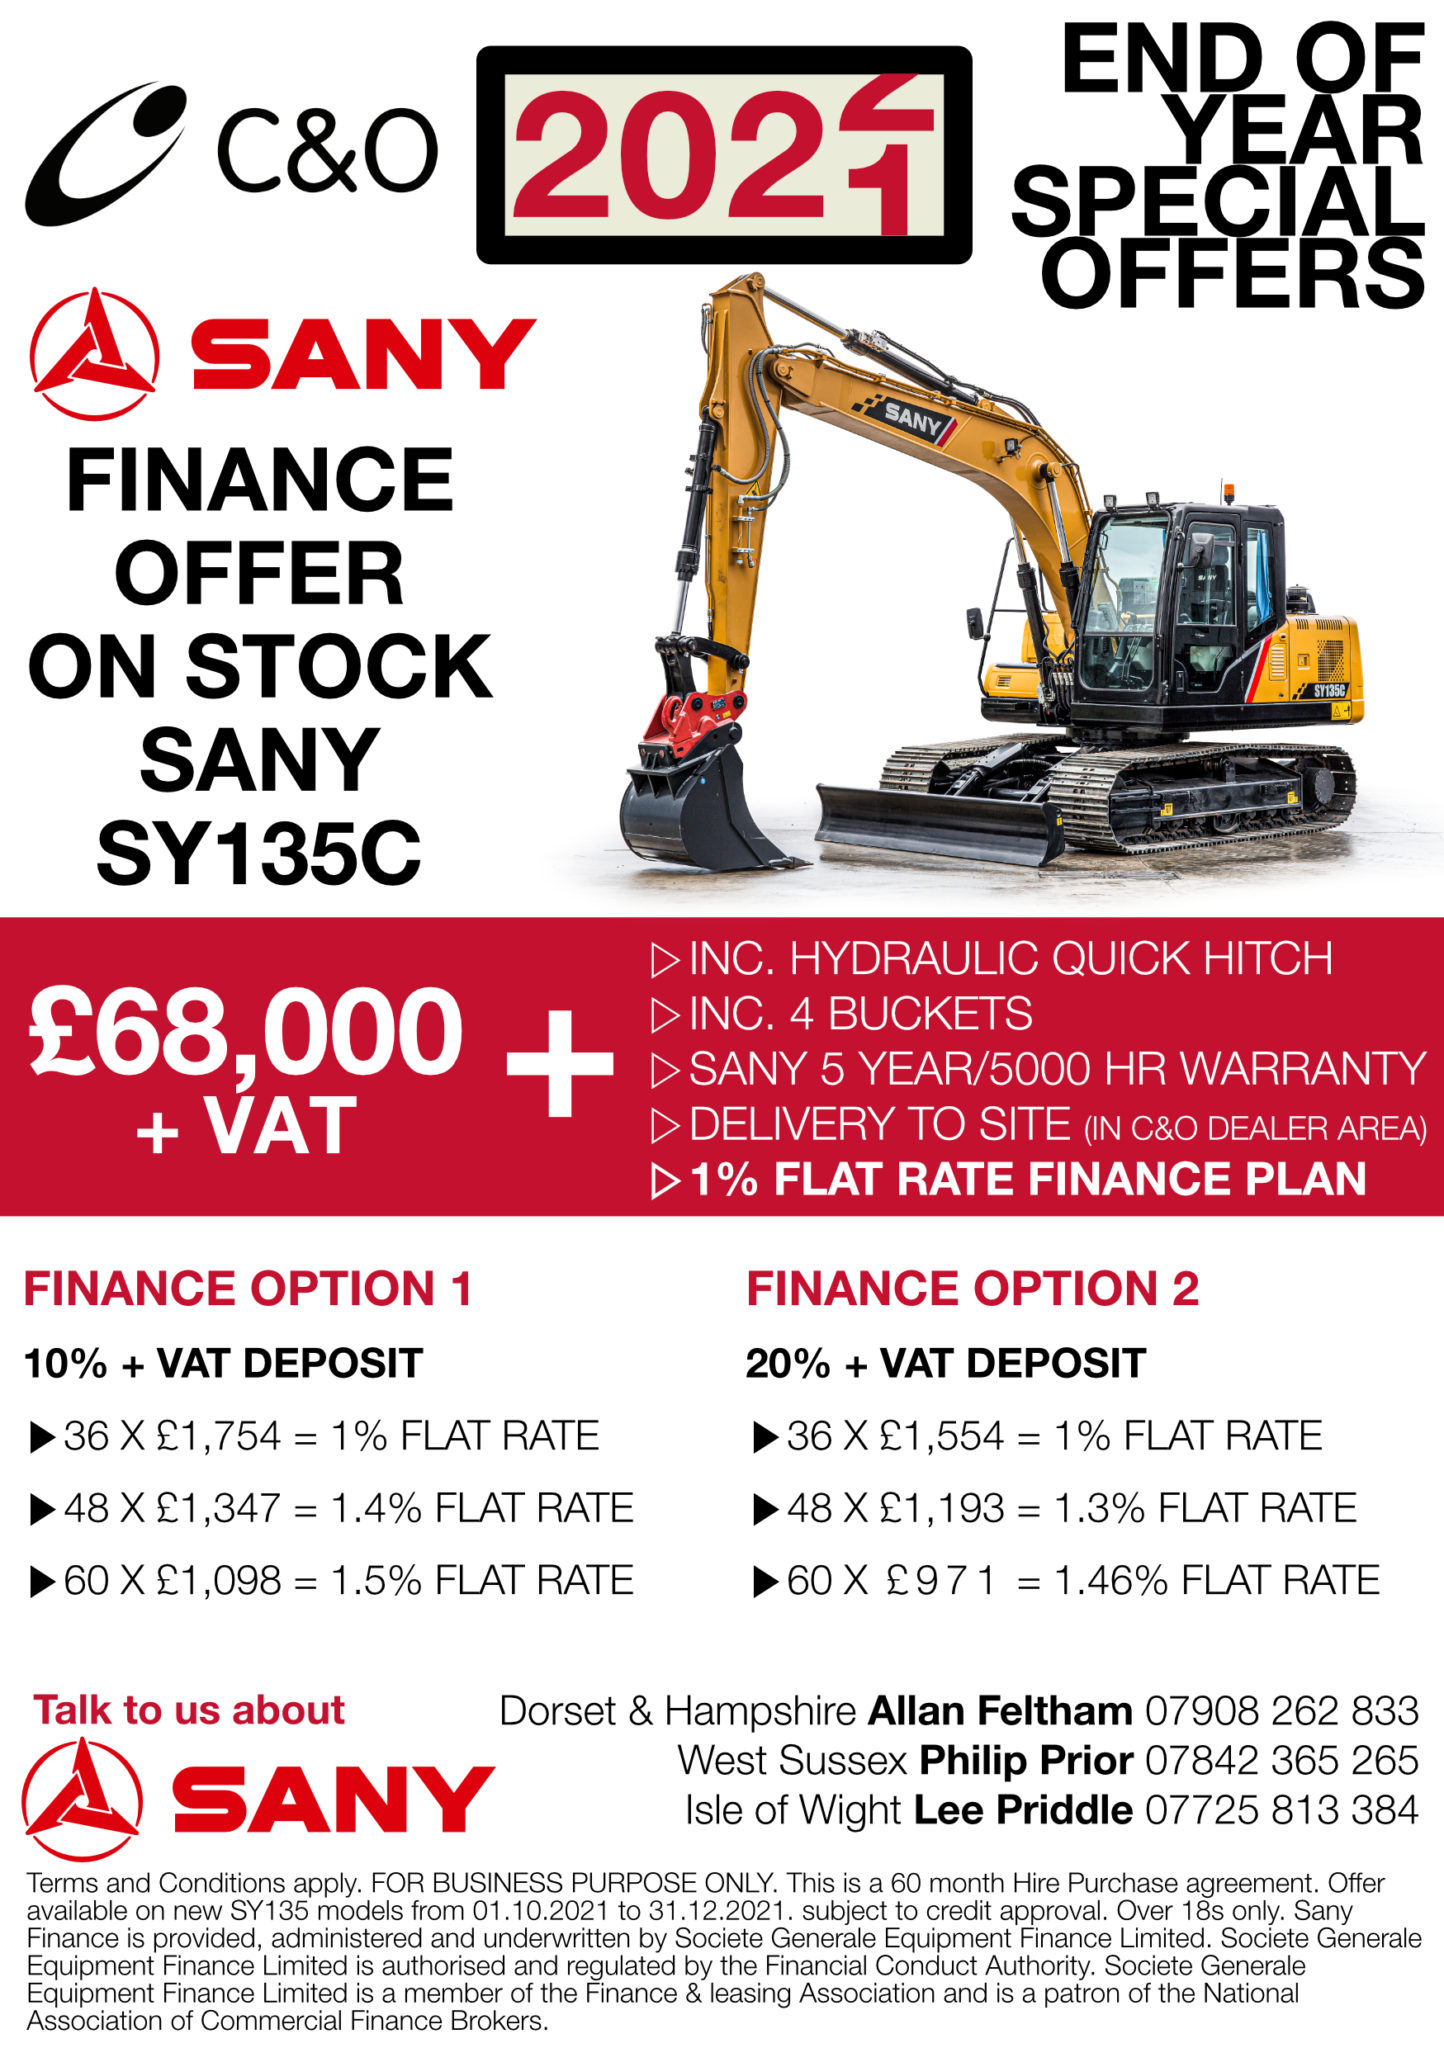 End of Year Special Offer on SANY